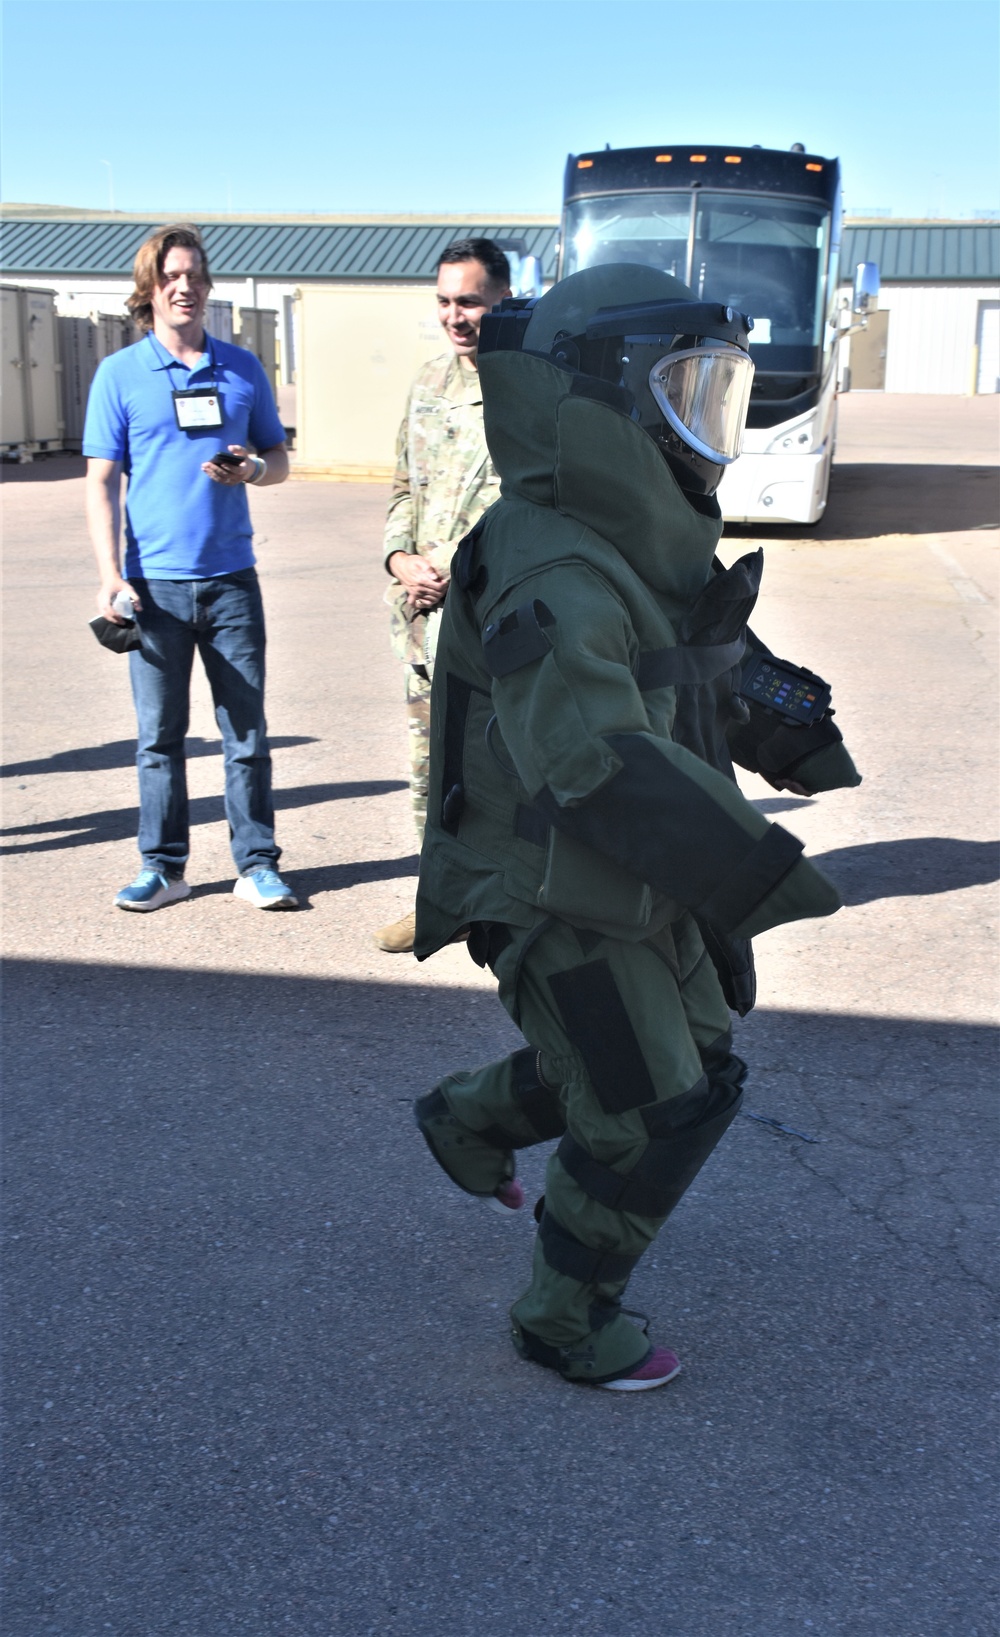 Educators Tour offers glimpse into Fort Carson operations